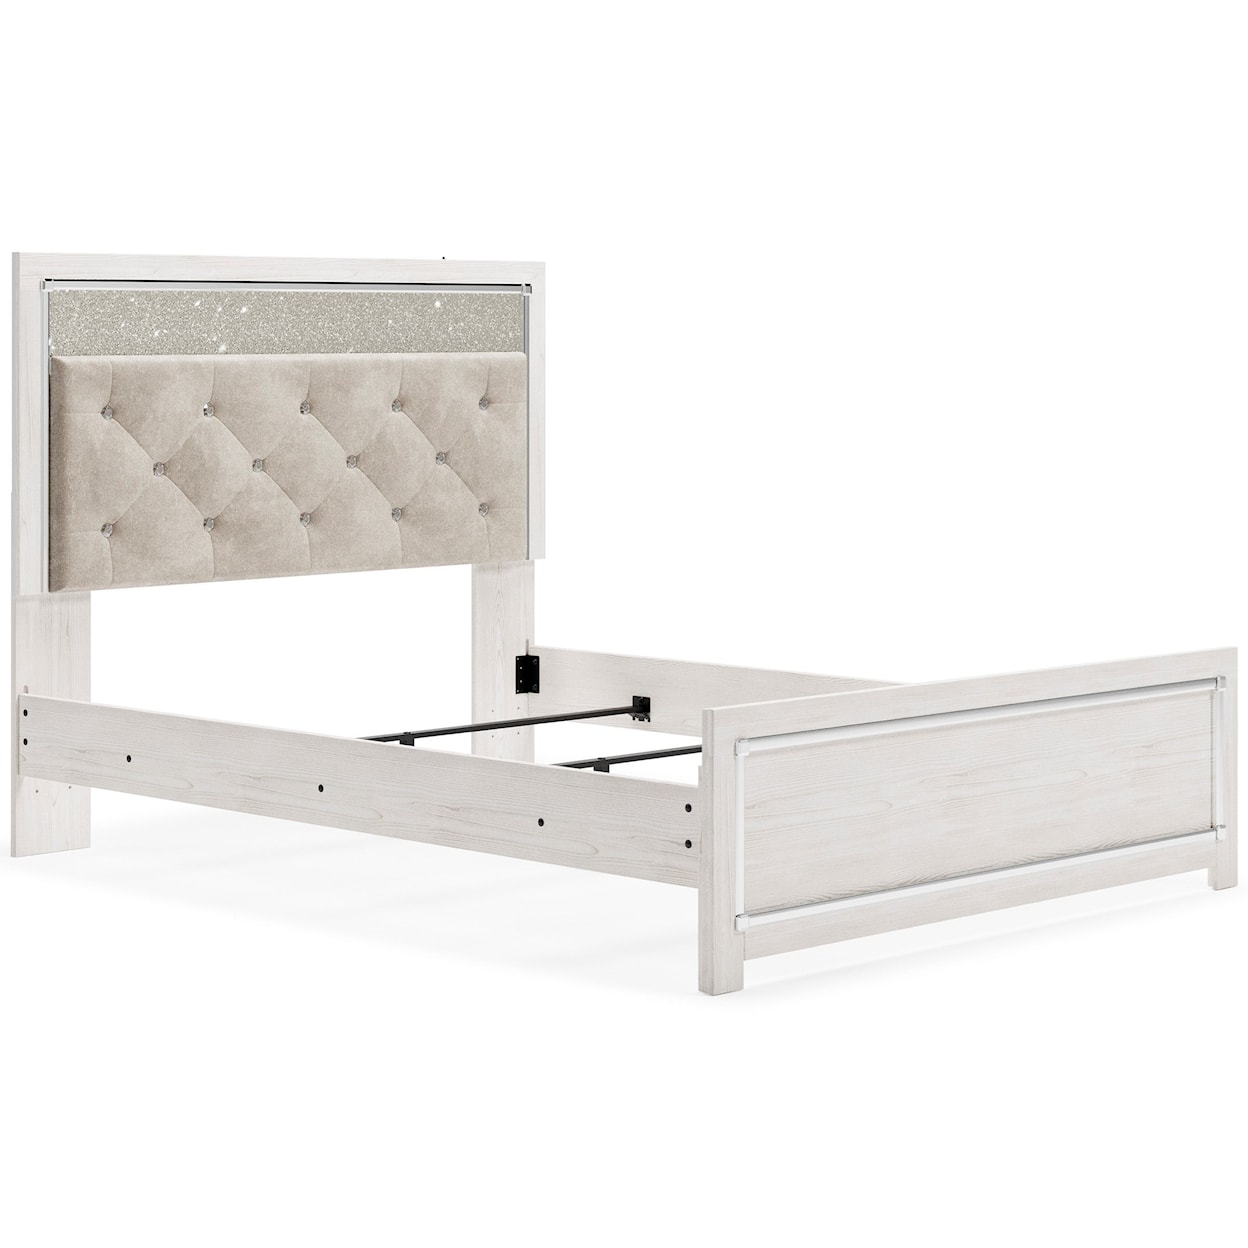 Signature Design by Ashley Furniture Altyra Queen Upholstered Panel Bed